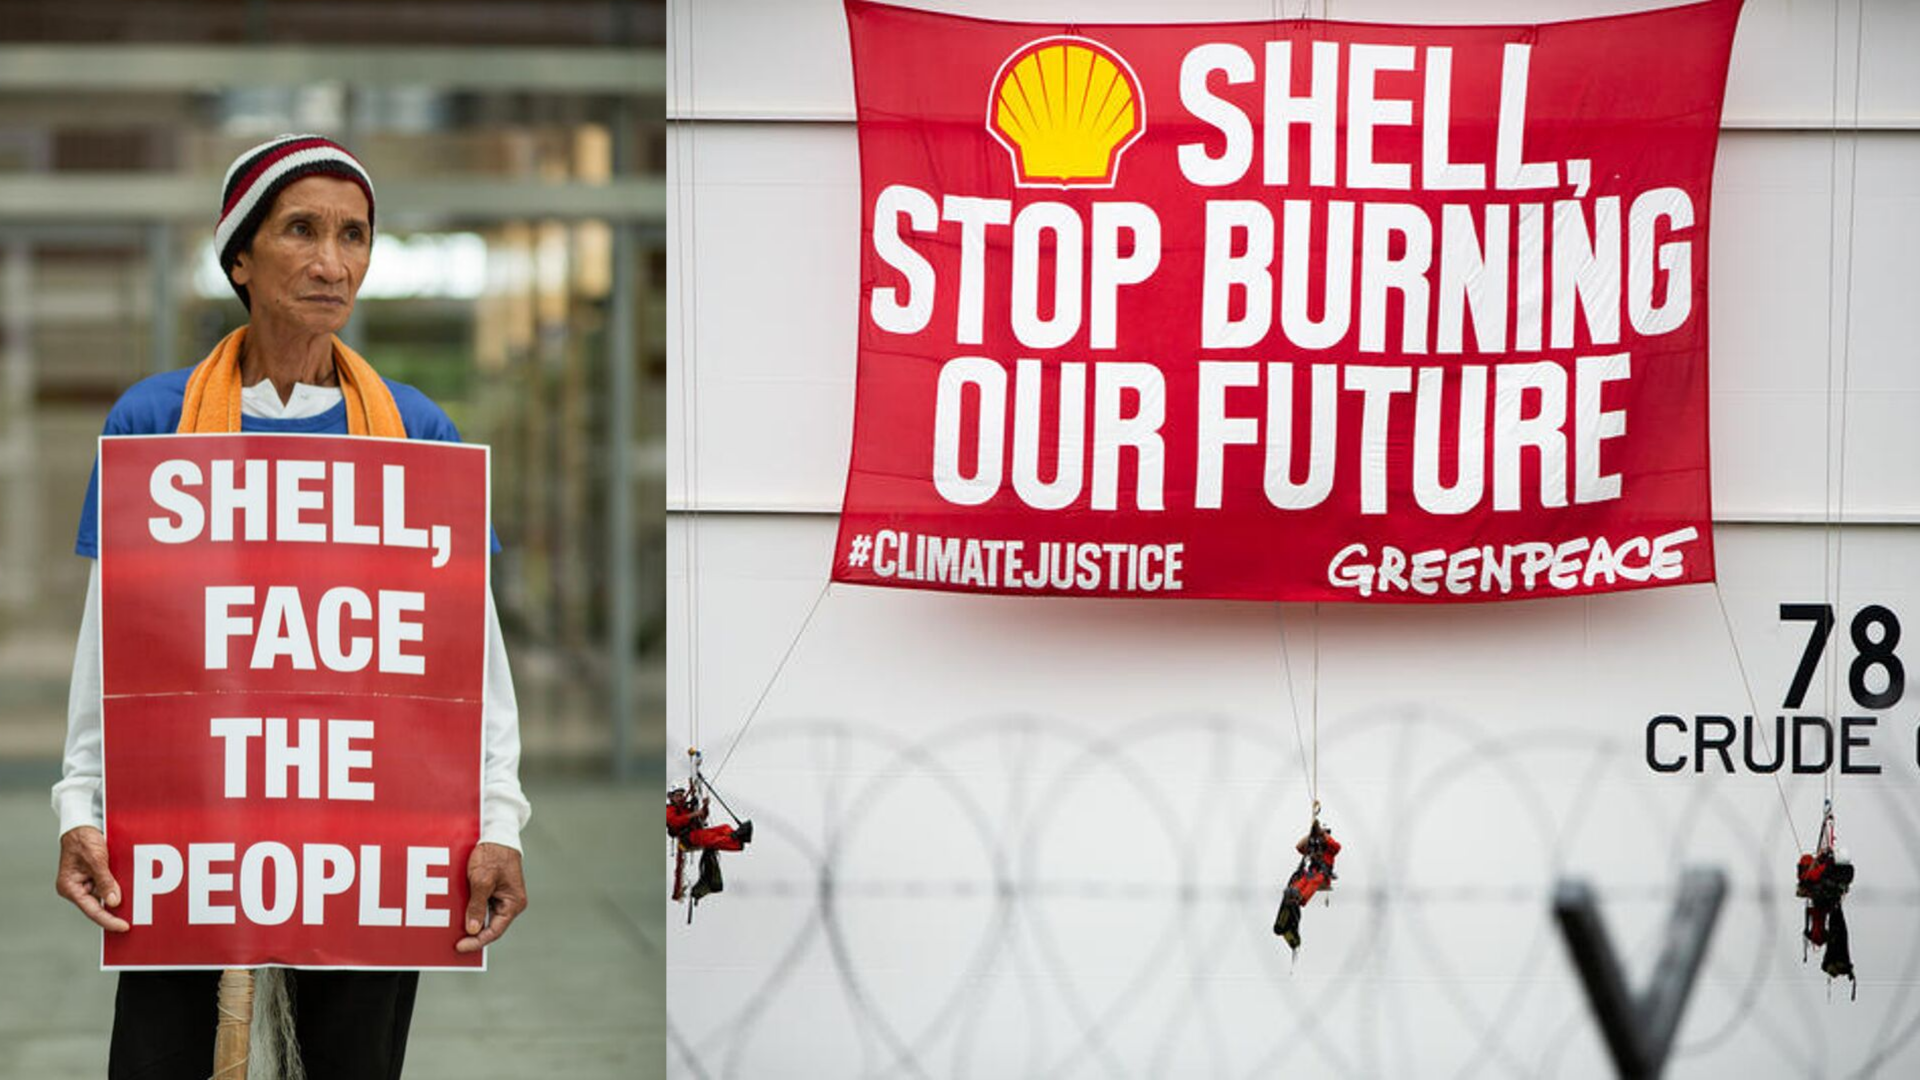 (L) Fred De la Cruz, fisherman from the climate impacted community in Bataan protests in front of Shell’s Manila HQ. (R) Activist Batangas refinery of fossil fuel giant Shell, South of Manila.